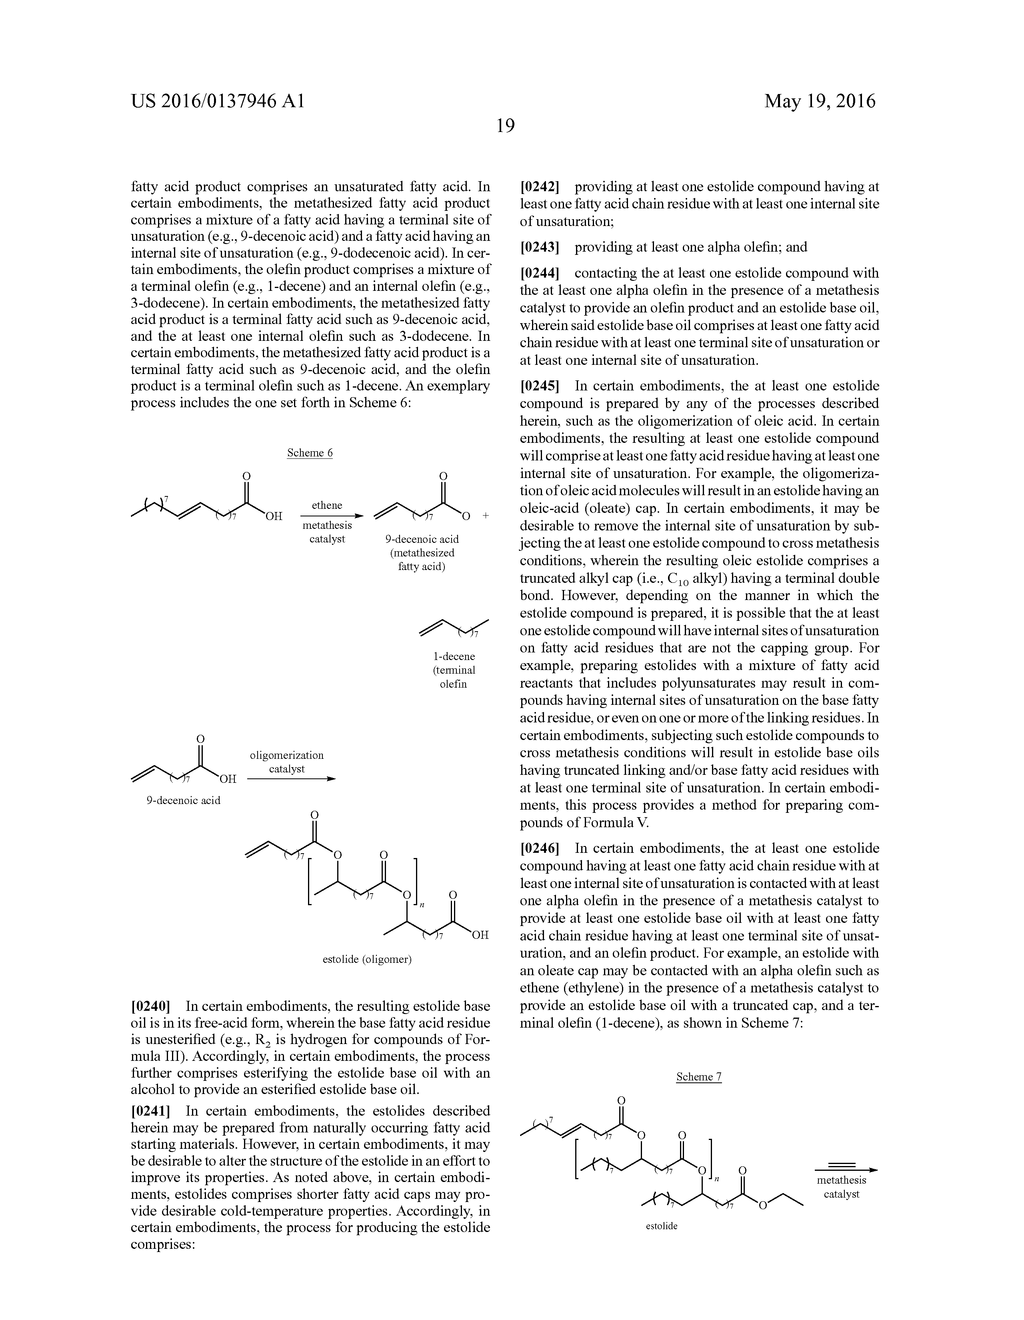 PROCESSES FOR PREPARING ESTOLIDE BASE OILS AND OLIGOMERIC COMPOUNDS THAT     INCLUDE CROSS METATHESIS - diagram, schematic, and image 20